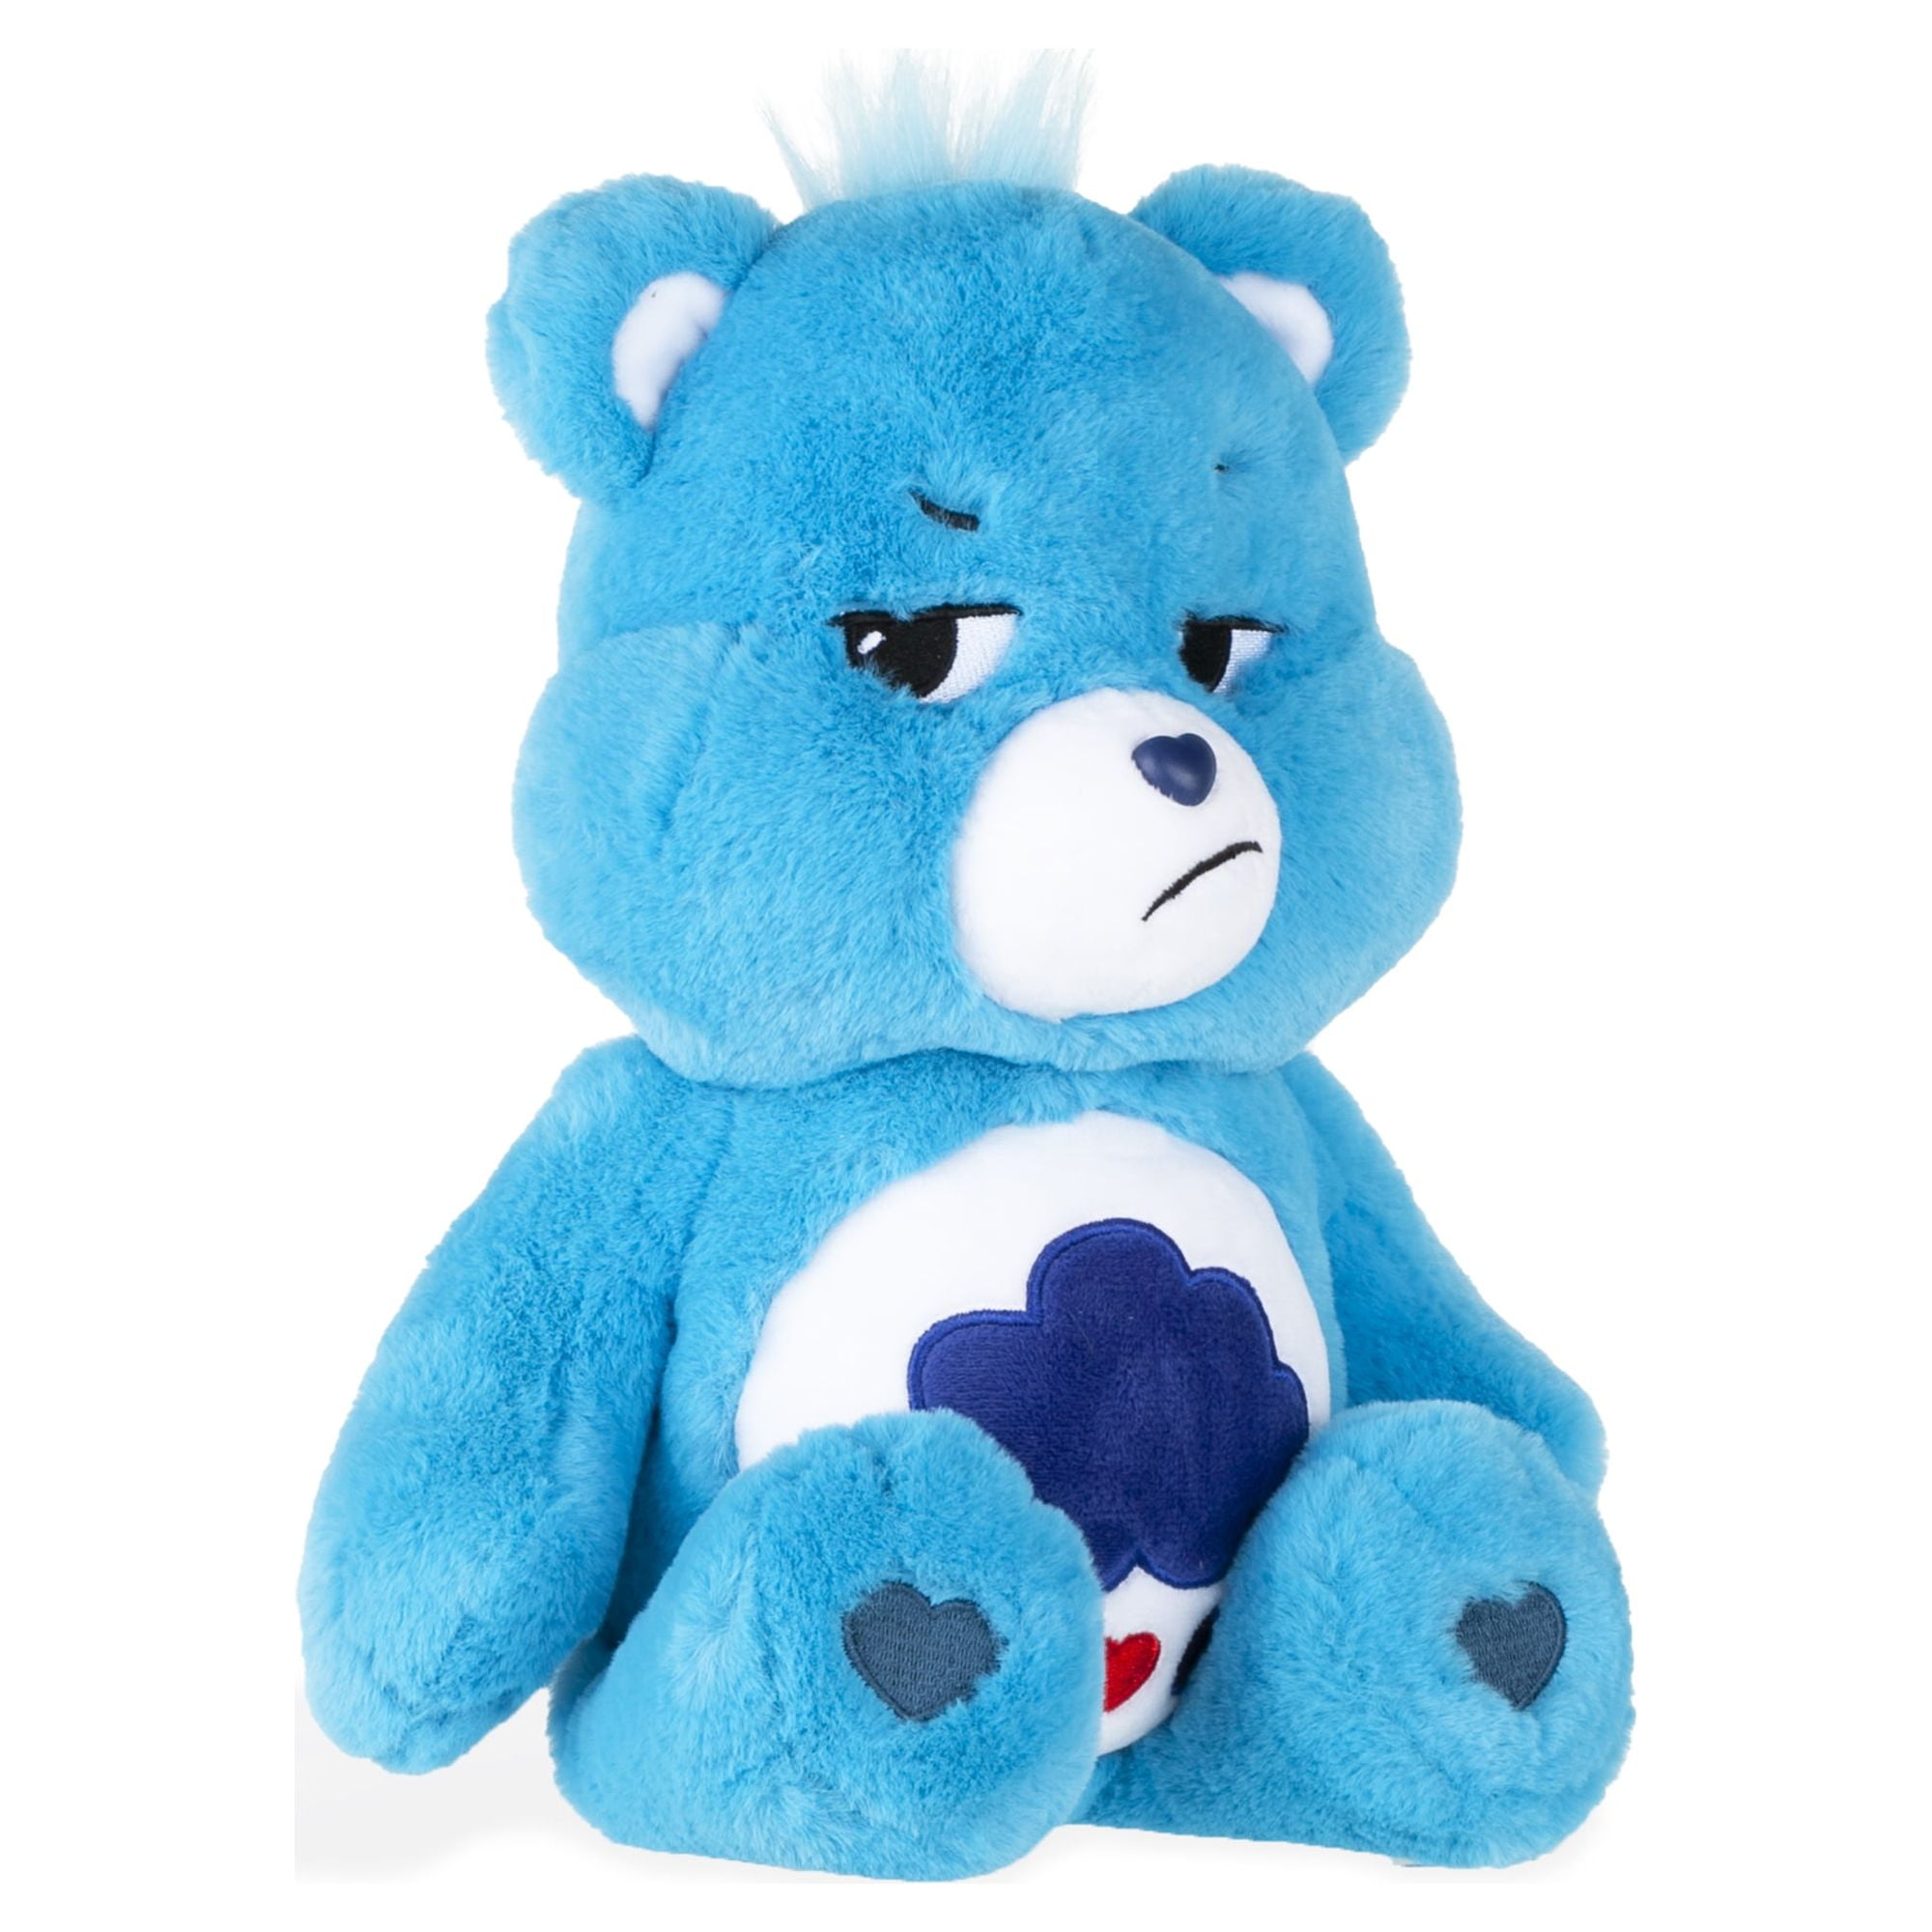 Exclusive Care Bears Dare to Care Bear™ Gold Edition 14 Plush